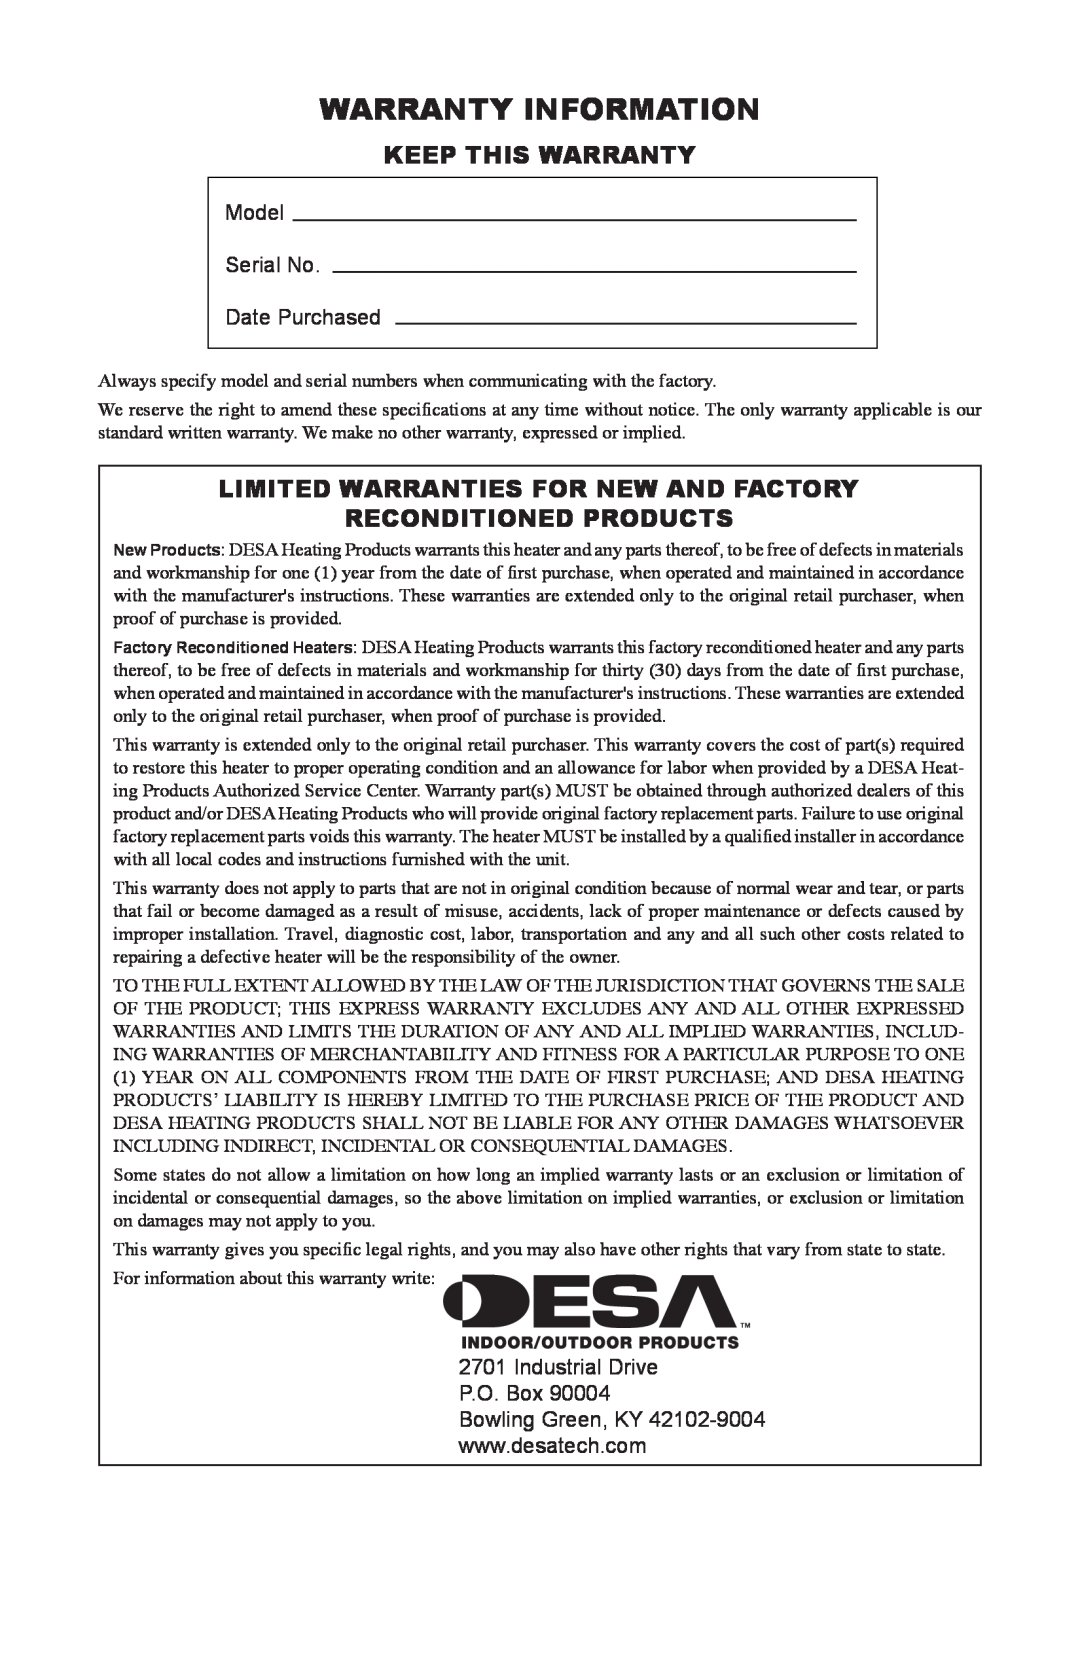 Desa PORTABLE PROPANE/LP HEATER Warranty Information, Keep This Warranty, Limited Warranties For New And Factory 